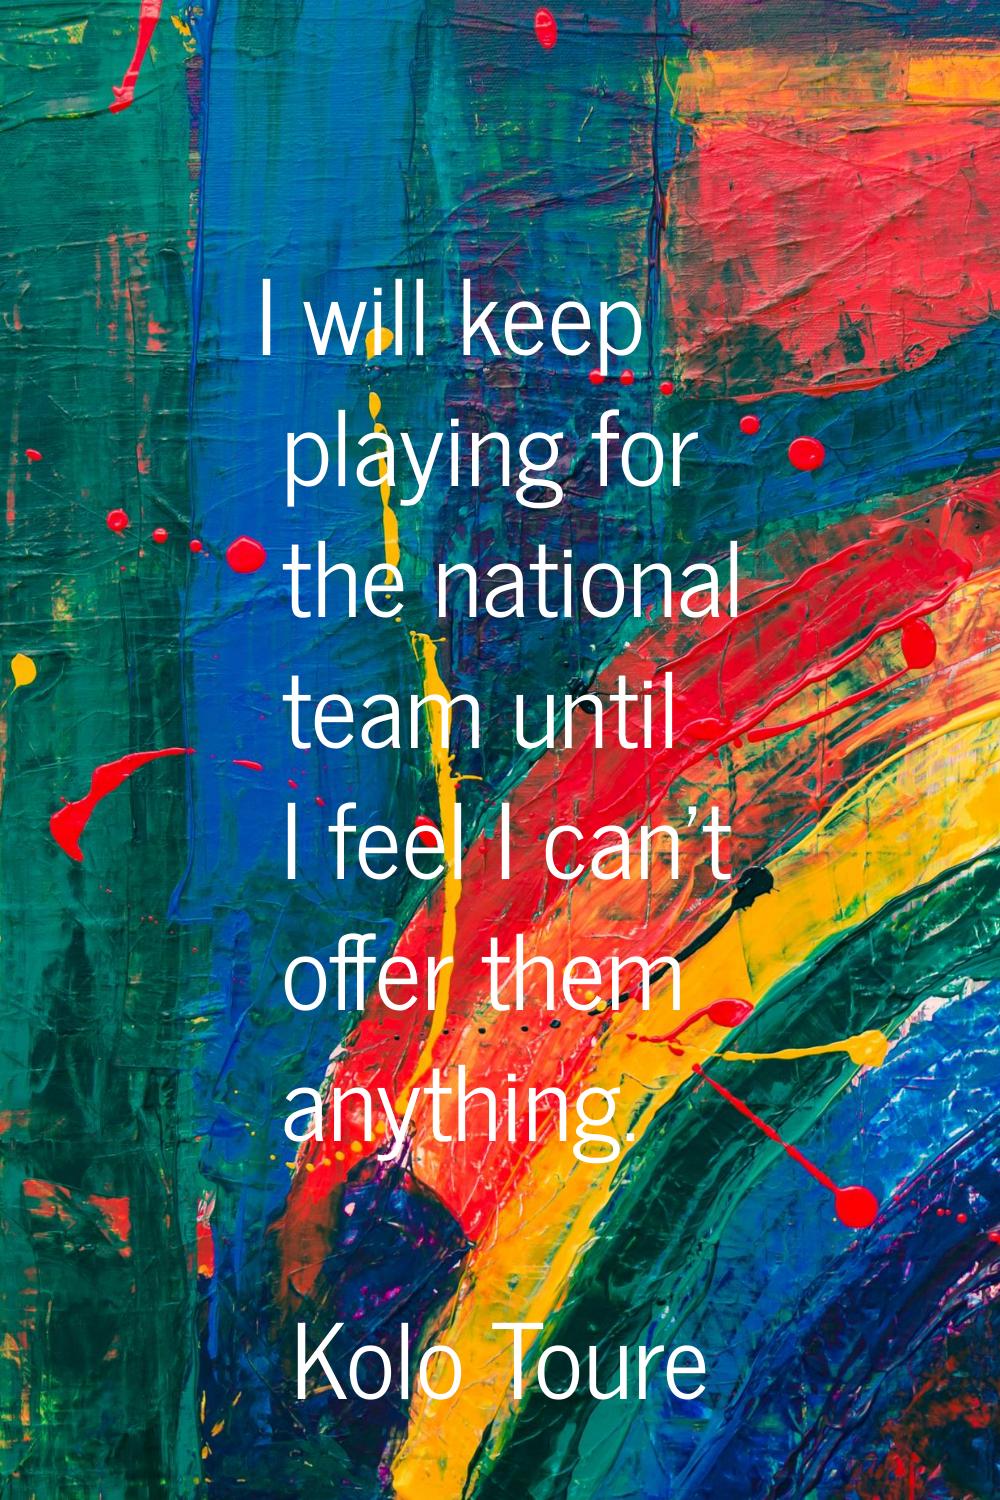 I will keep playing for the national team until I feel I can't offer them anything.